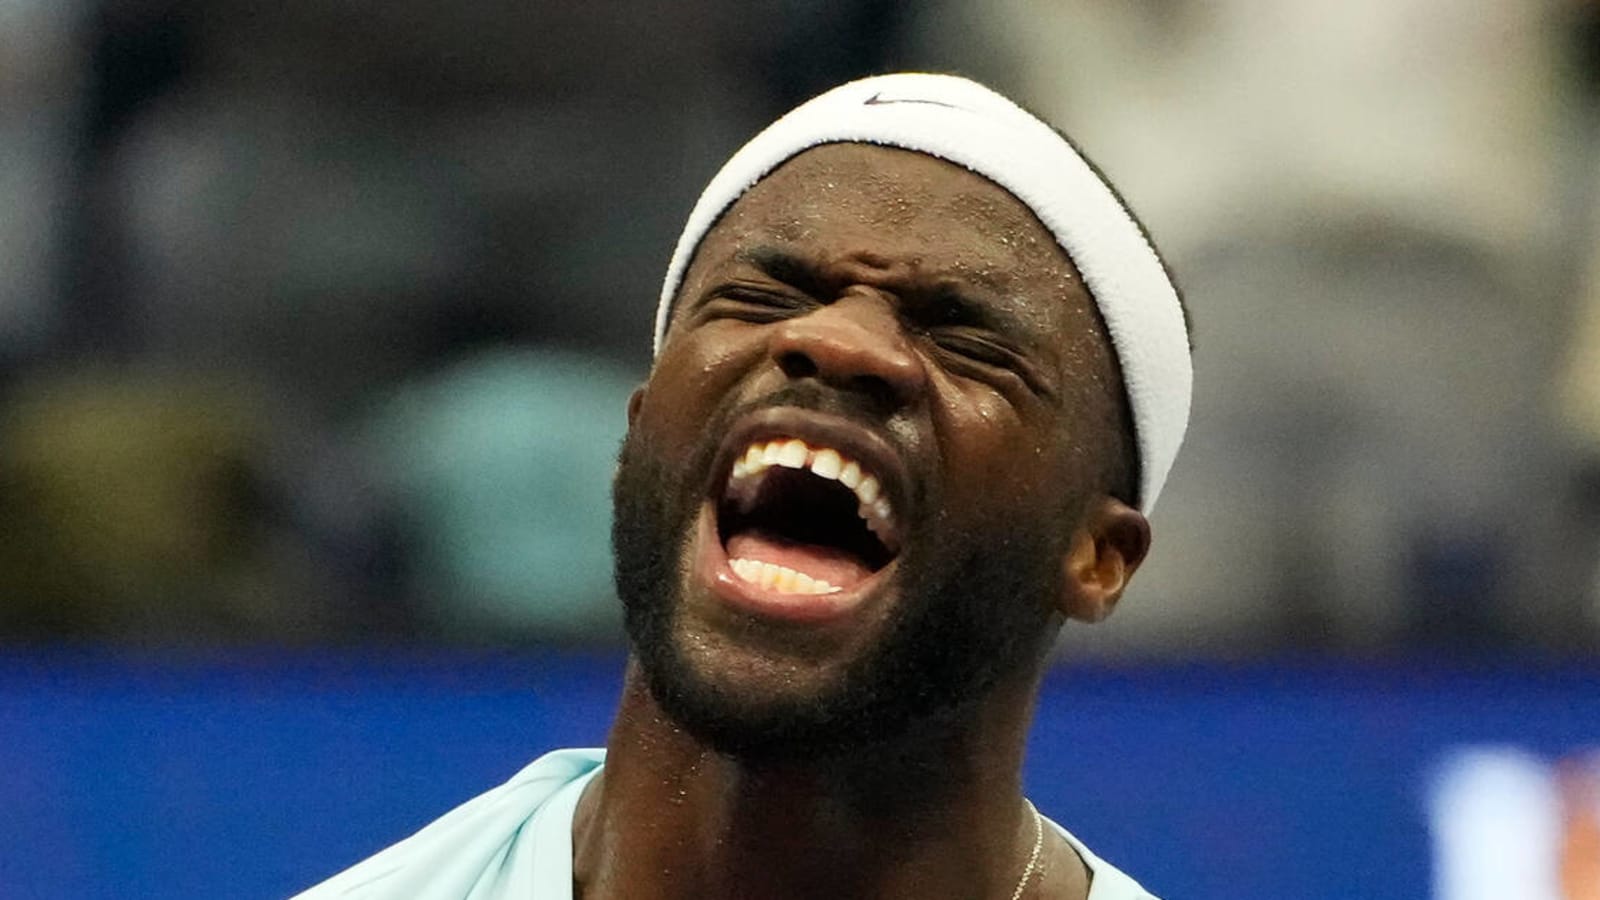 Frances Tiafoe’s coach has warning for opponent ahead of U.S. Open semifinal match